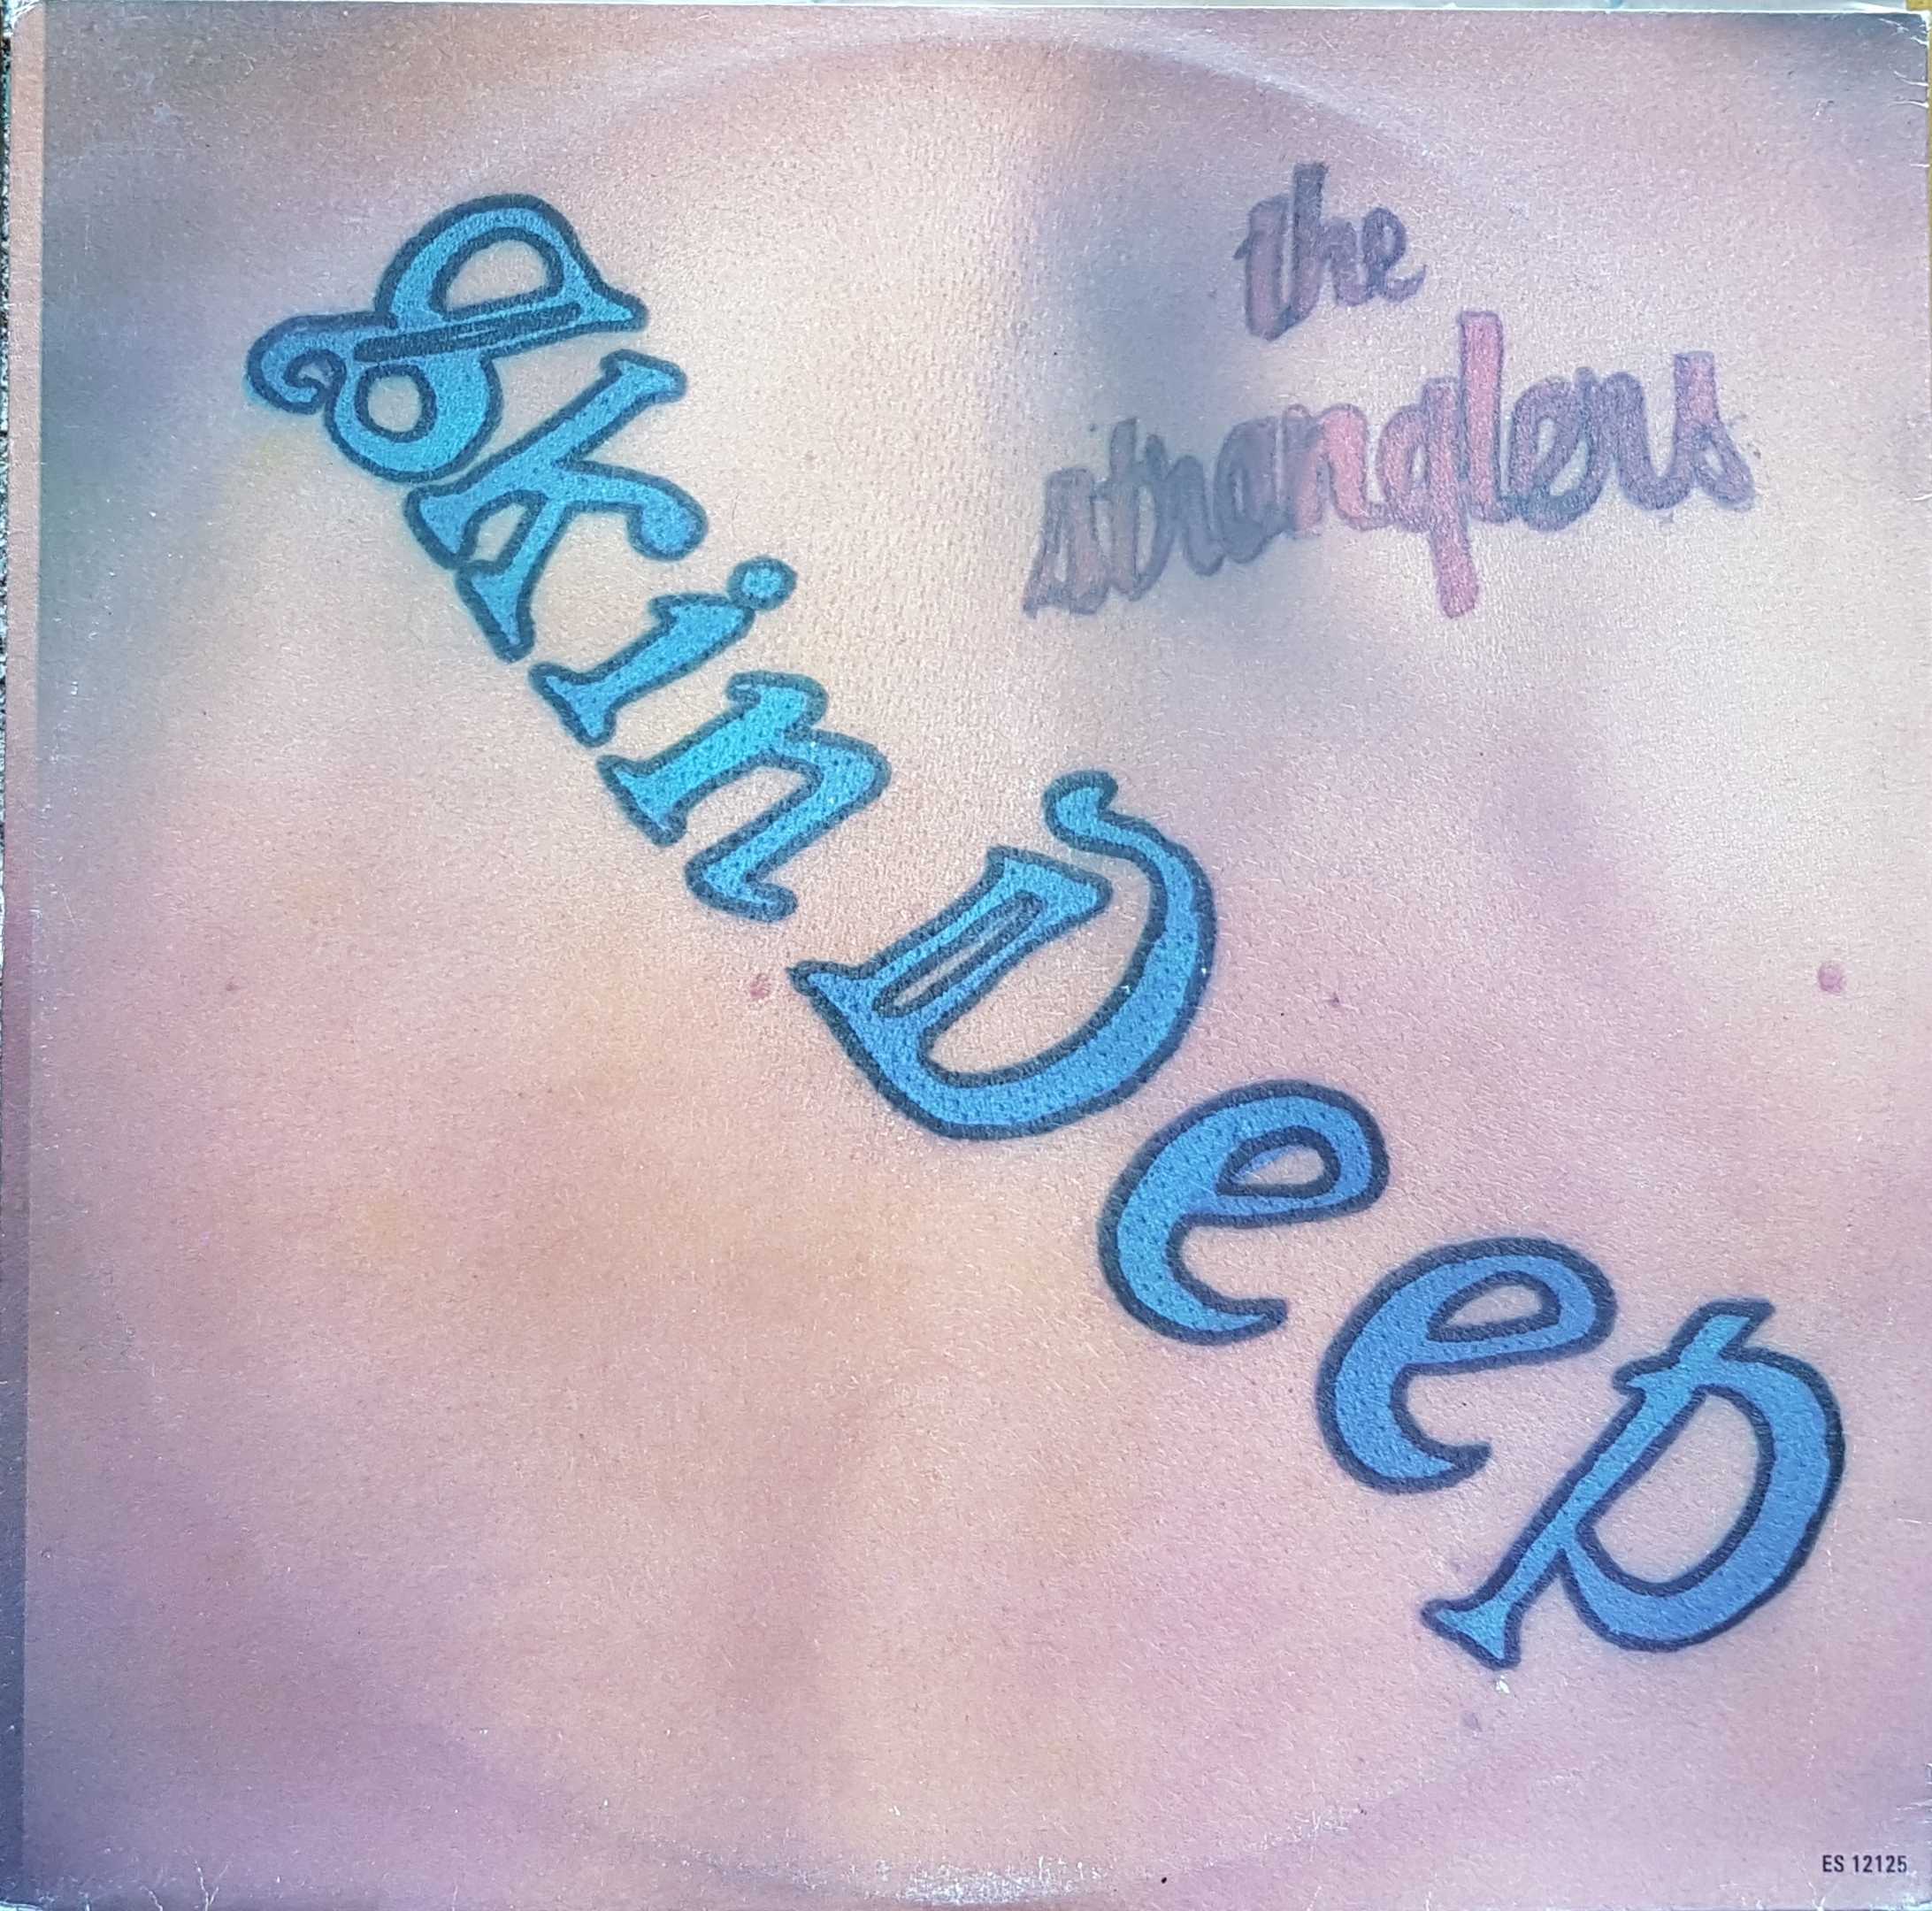 Picture of ES 12125 Skin deep - Australian import by artist The Stranglers from The Stranglers 12inches